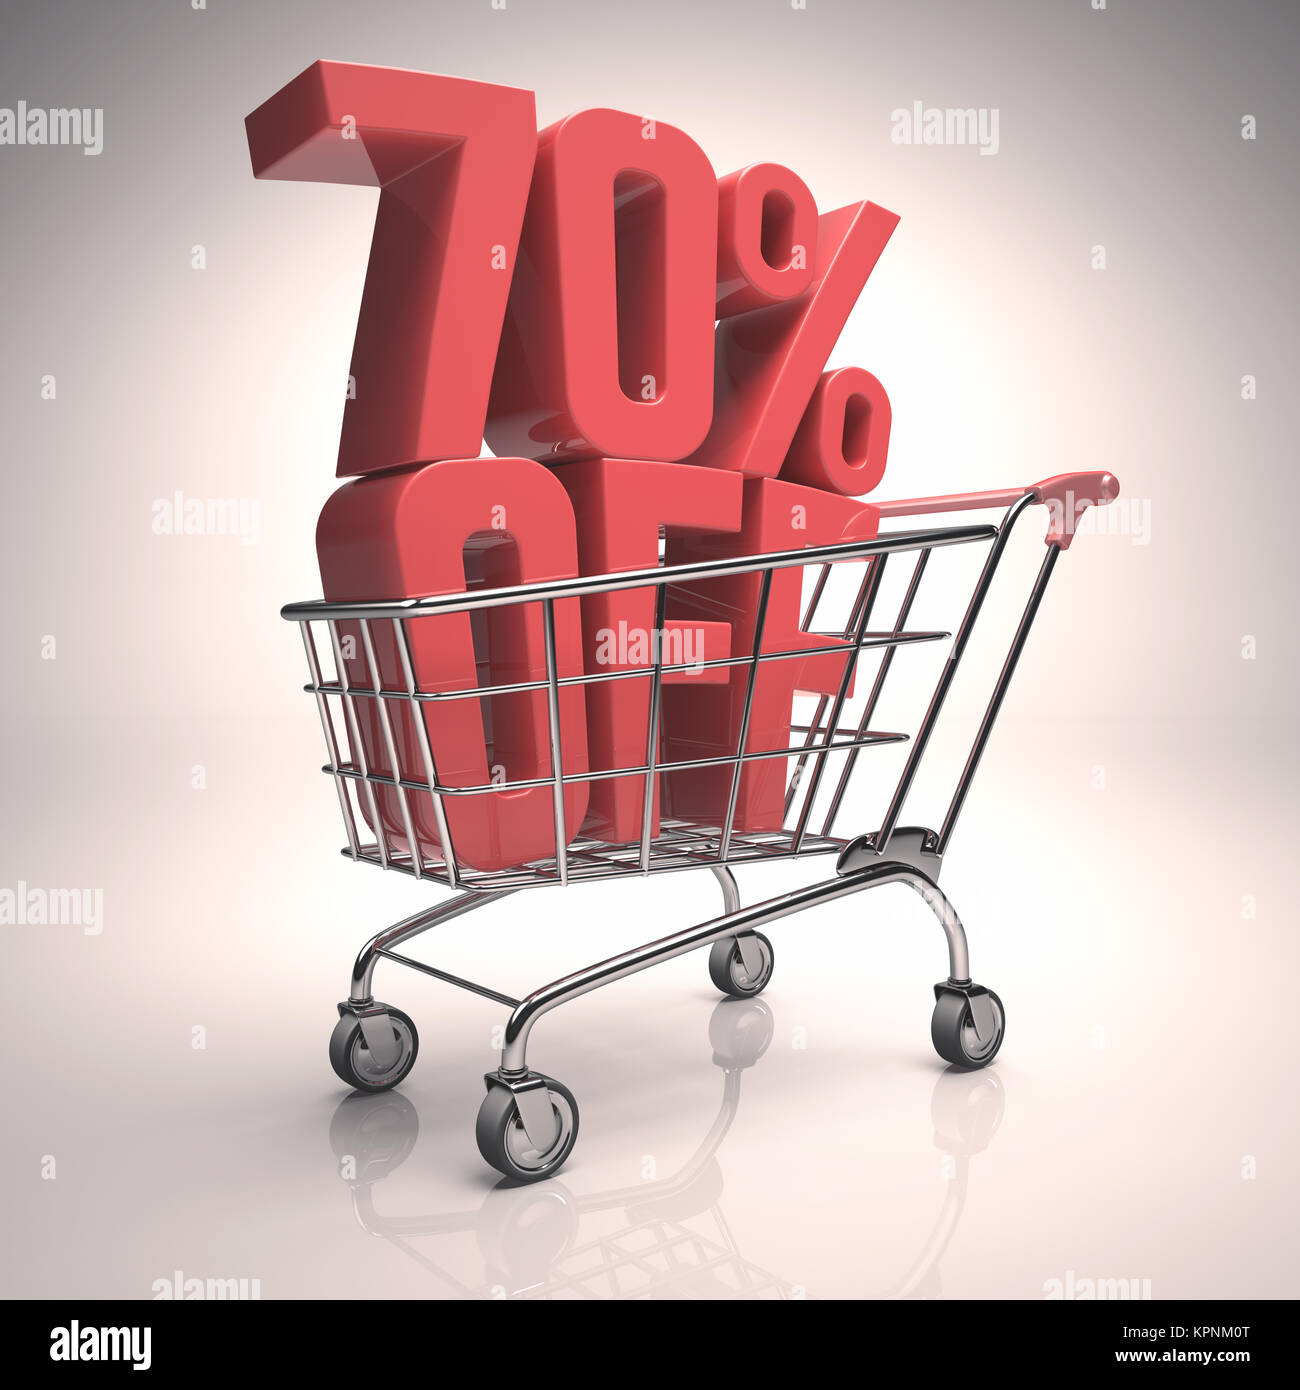 Clearance Shopping Cart Stock Photo